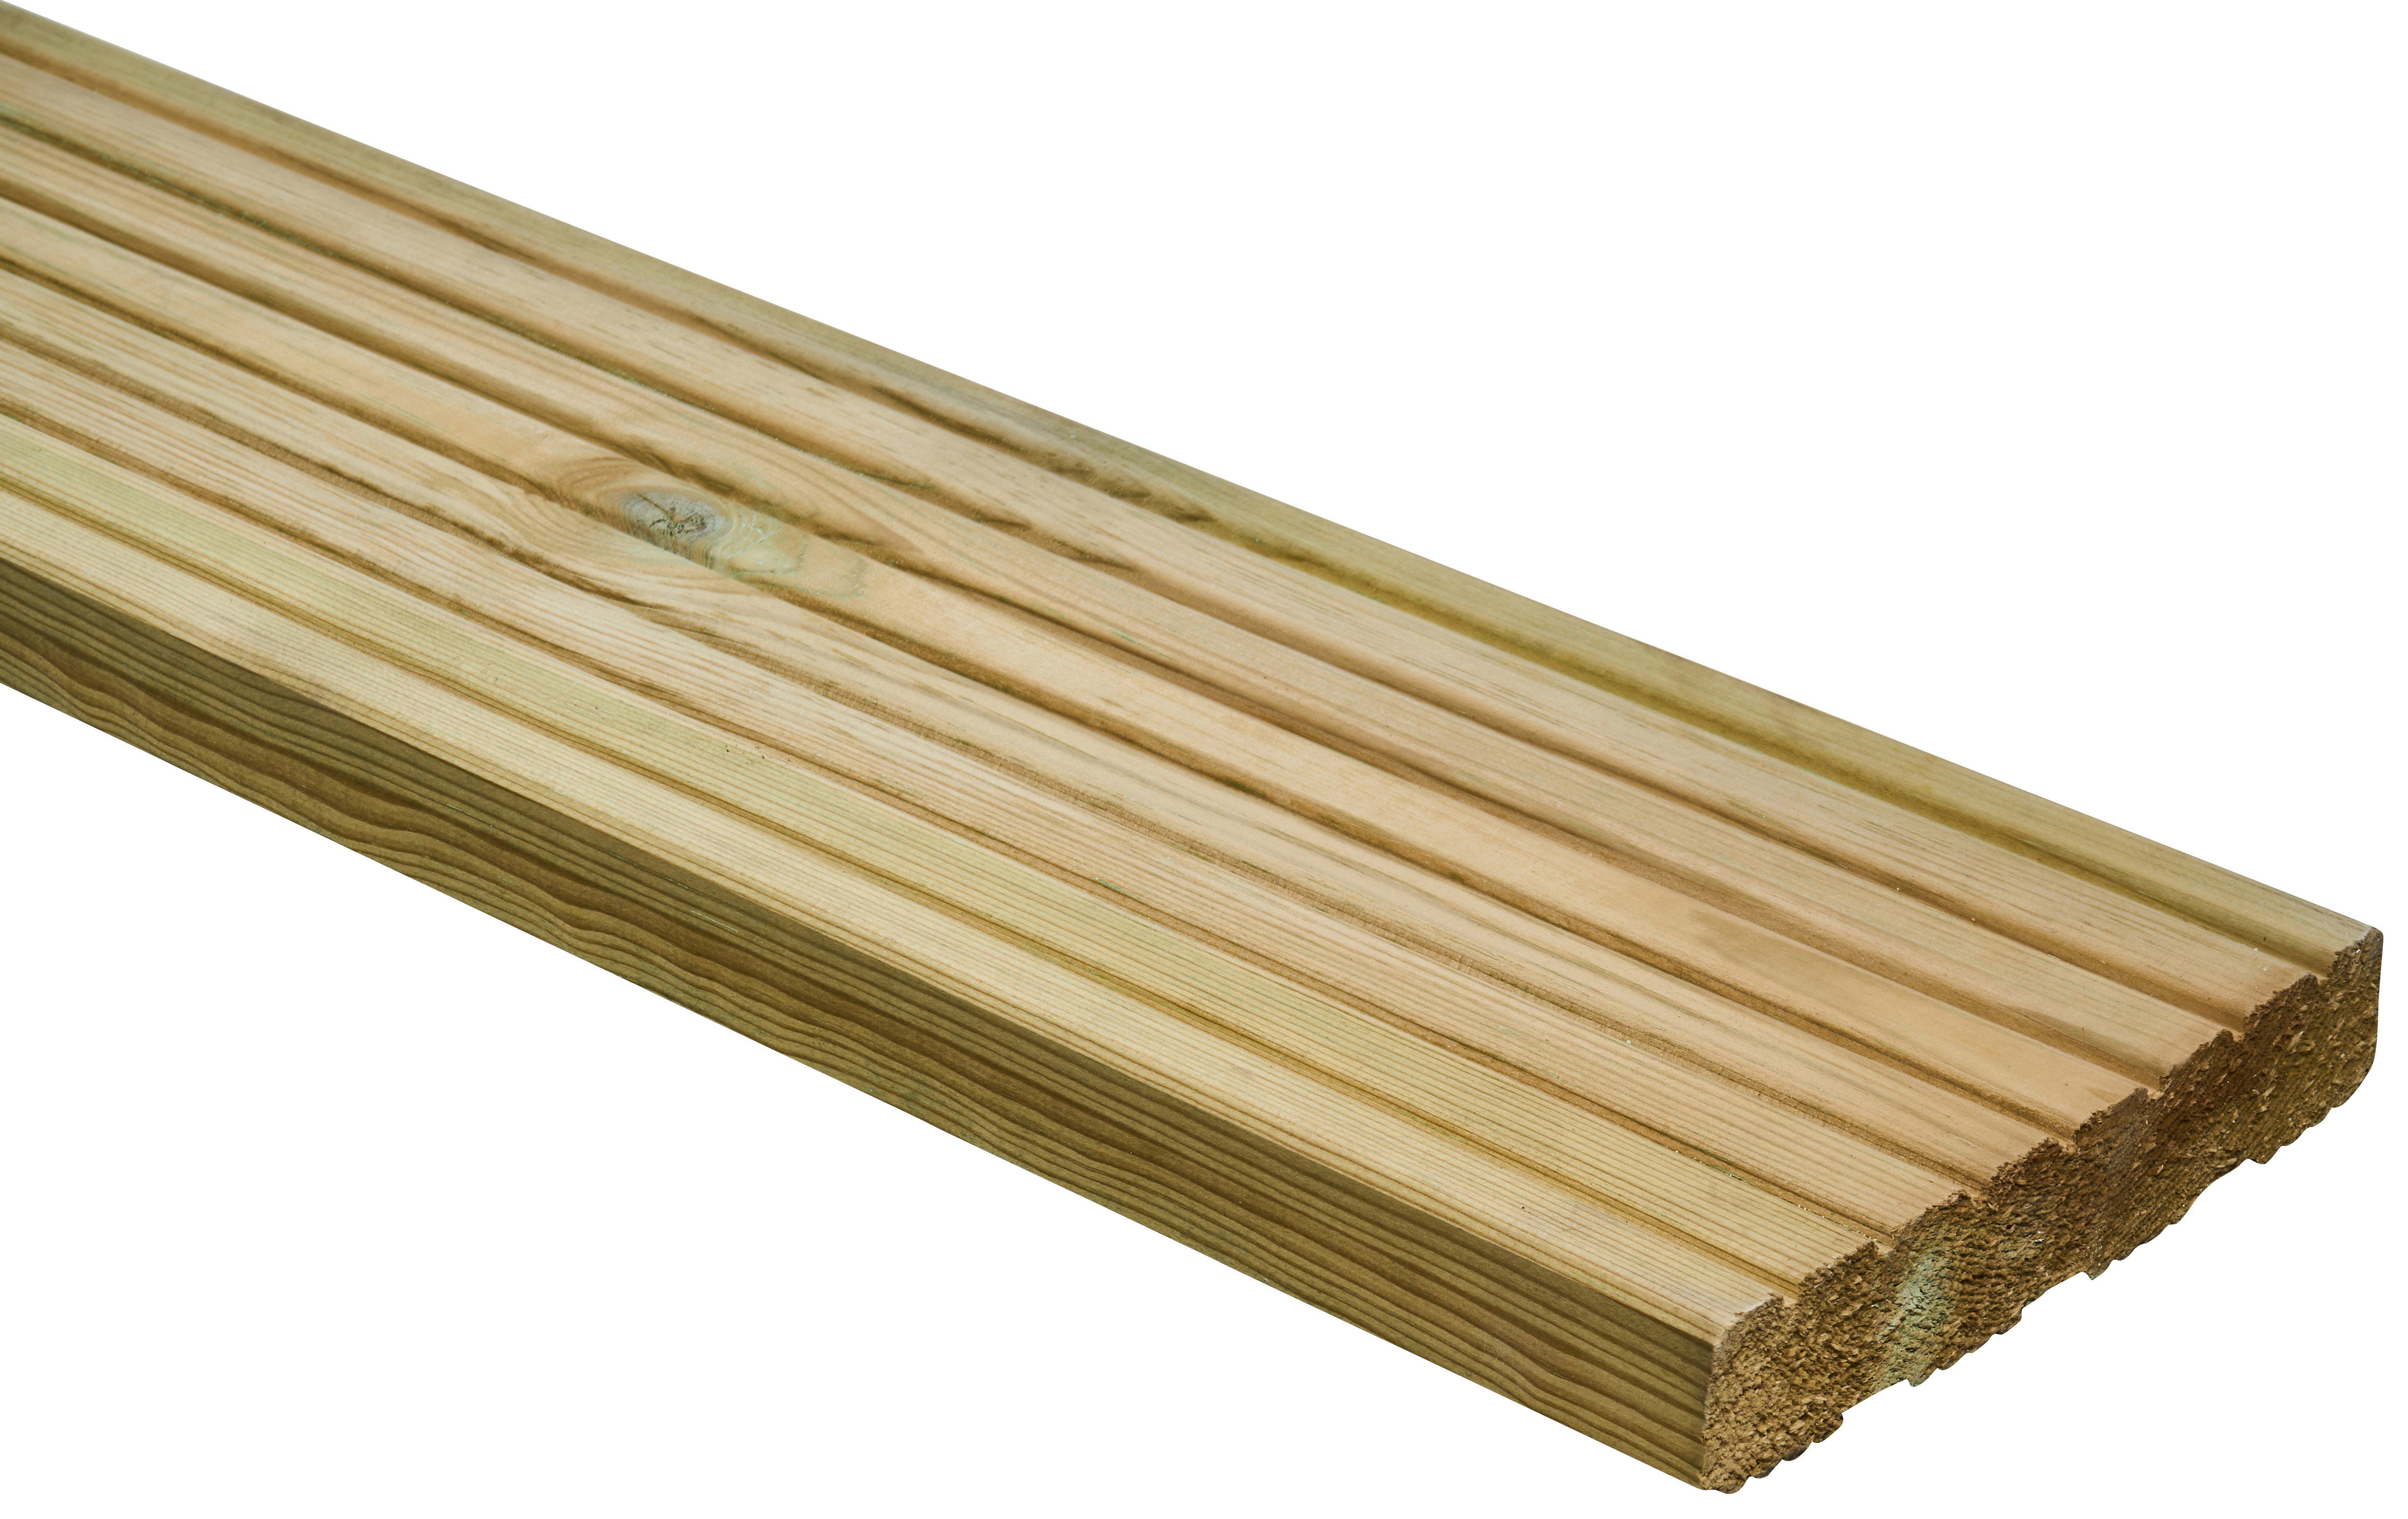 Wickes Pro Timber Deck Board - 27 x 144 x 4800mm - Pack of 40